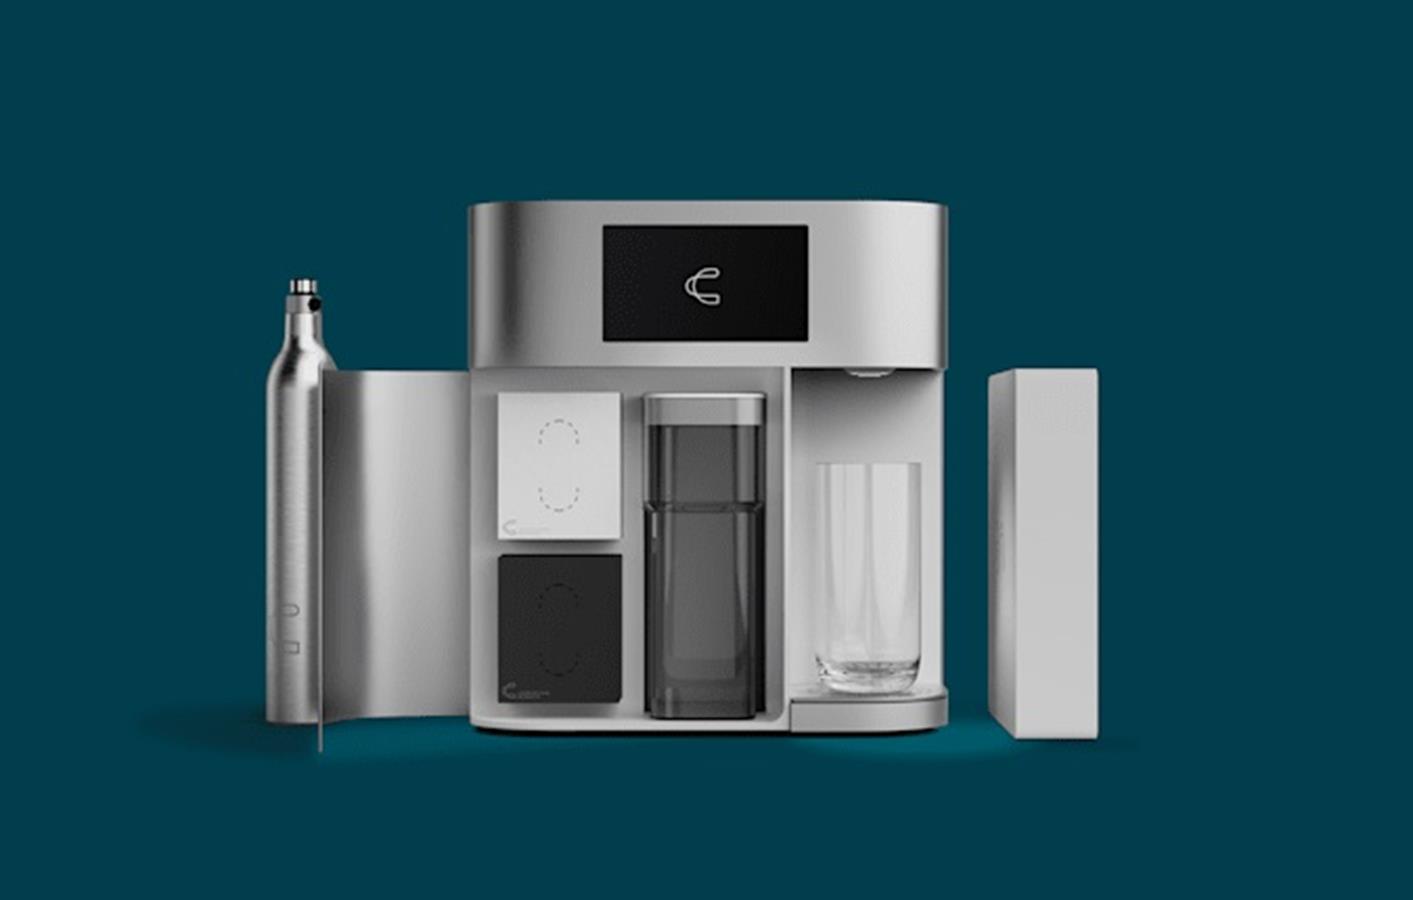 How about a molecular beverage printer?  With Cana One you will pay for every glass